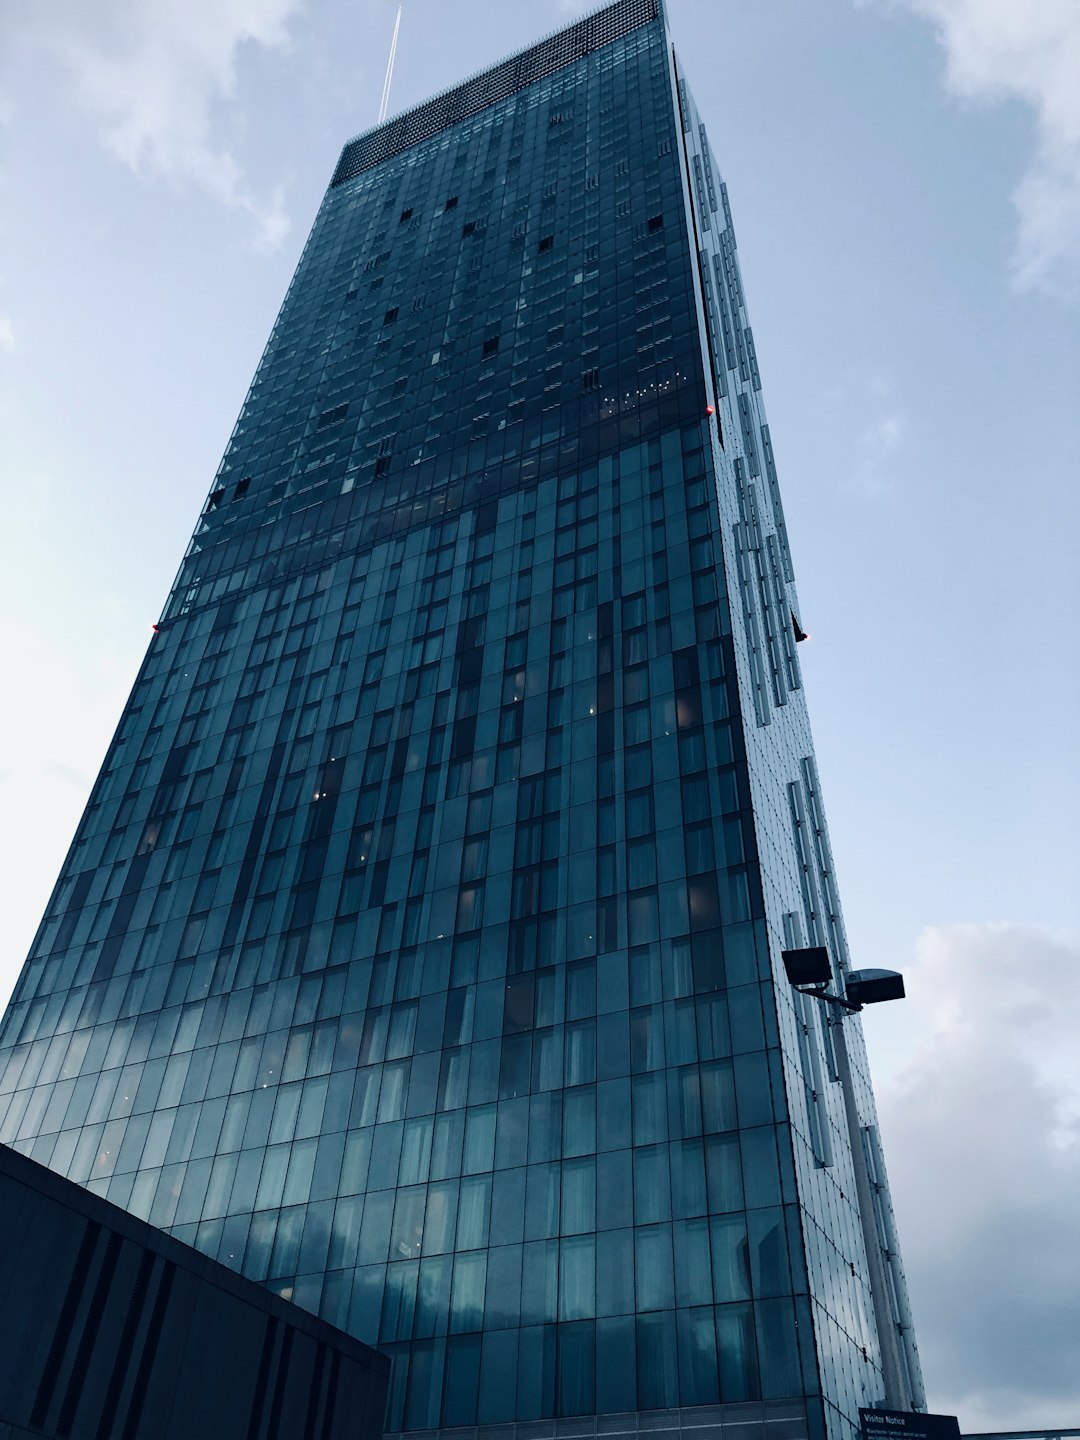 Travel Tips and Stories of Beetham Tower in United Kingdom